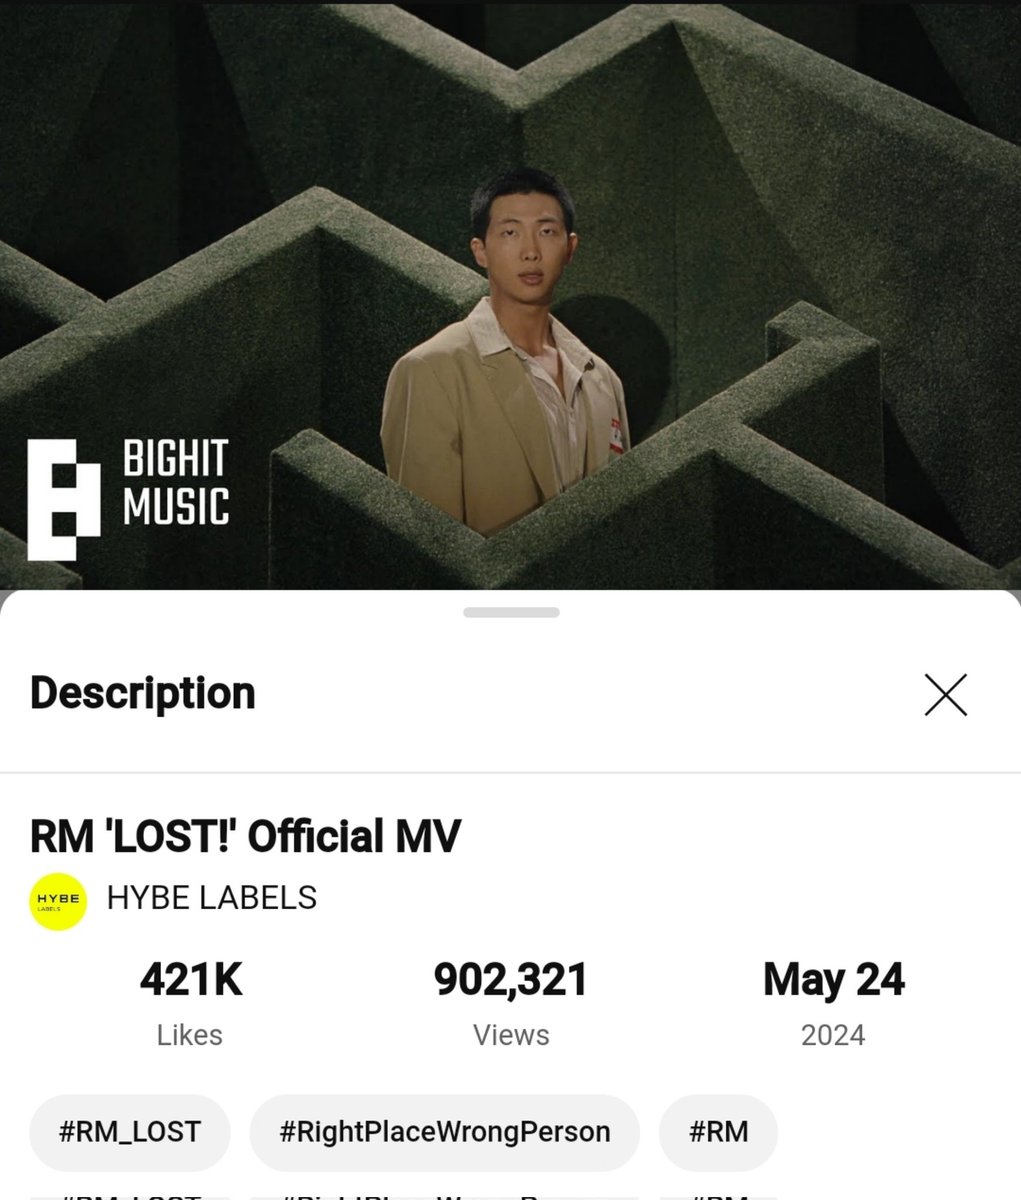 RM <LOST!> Official MV (youtu.be/kq6UVL3H6SI) 100K✅ 200K✅ 300K✅ 400K✅ 500K✅ 600K✅ 700K✅ 800K✅ 900K✅ 1M🔜 RPWP IS HERE LOST OUT NOW #RightPlaceWrongPerson #RM